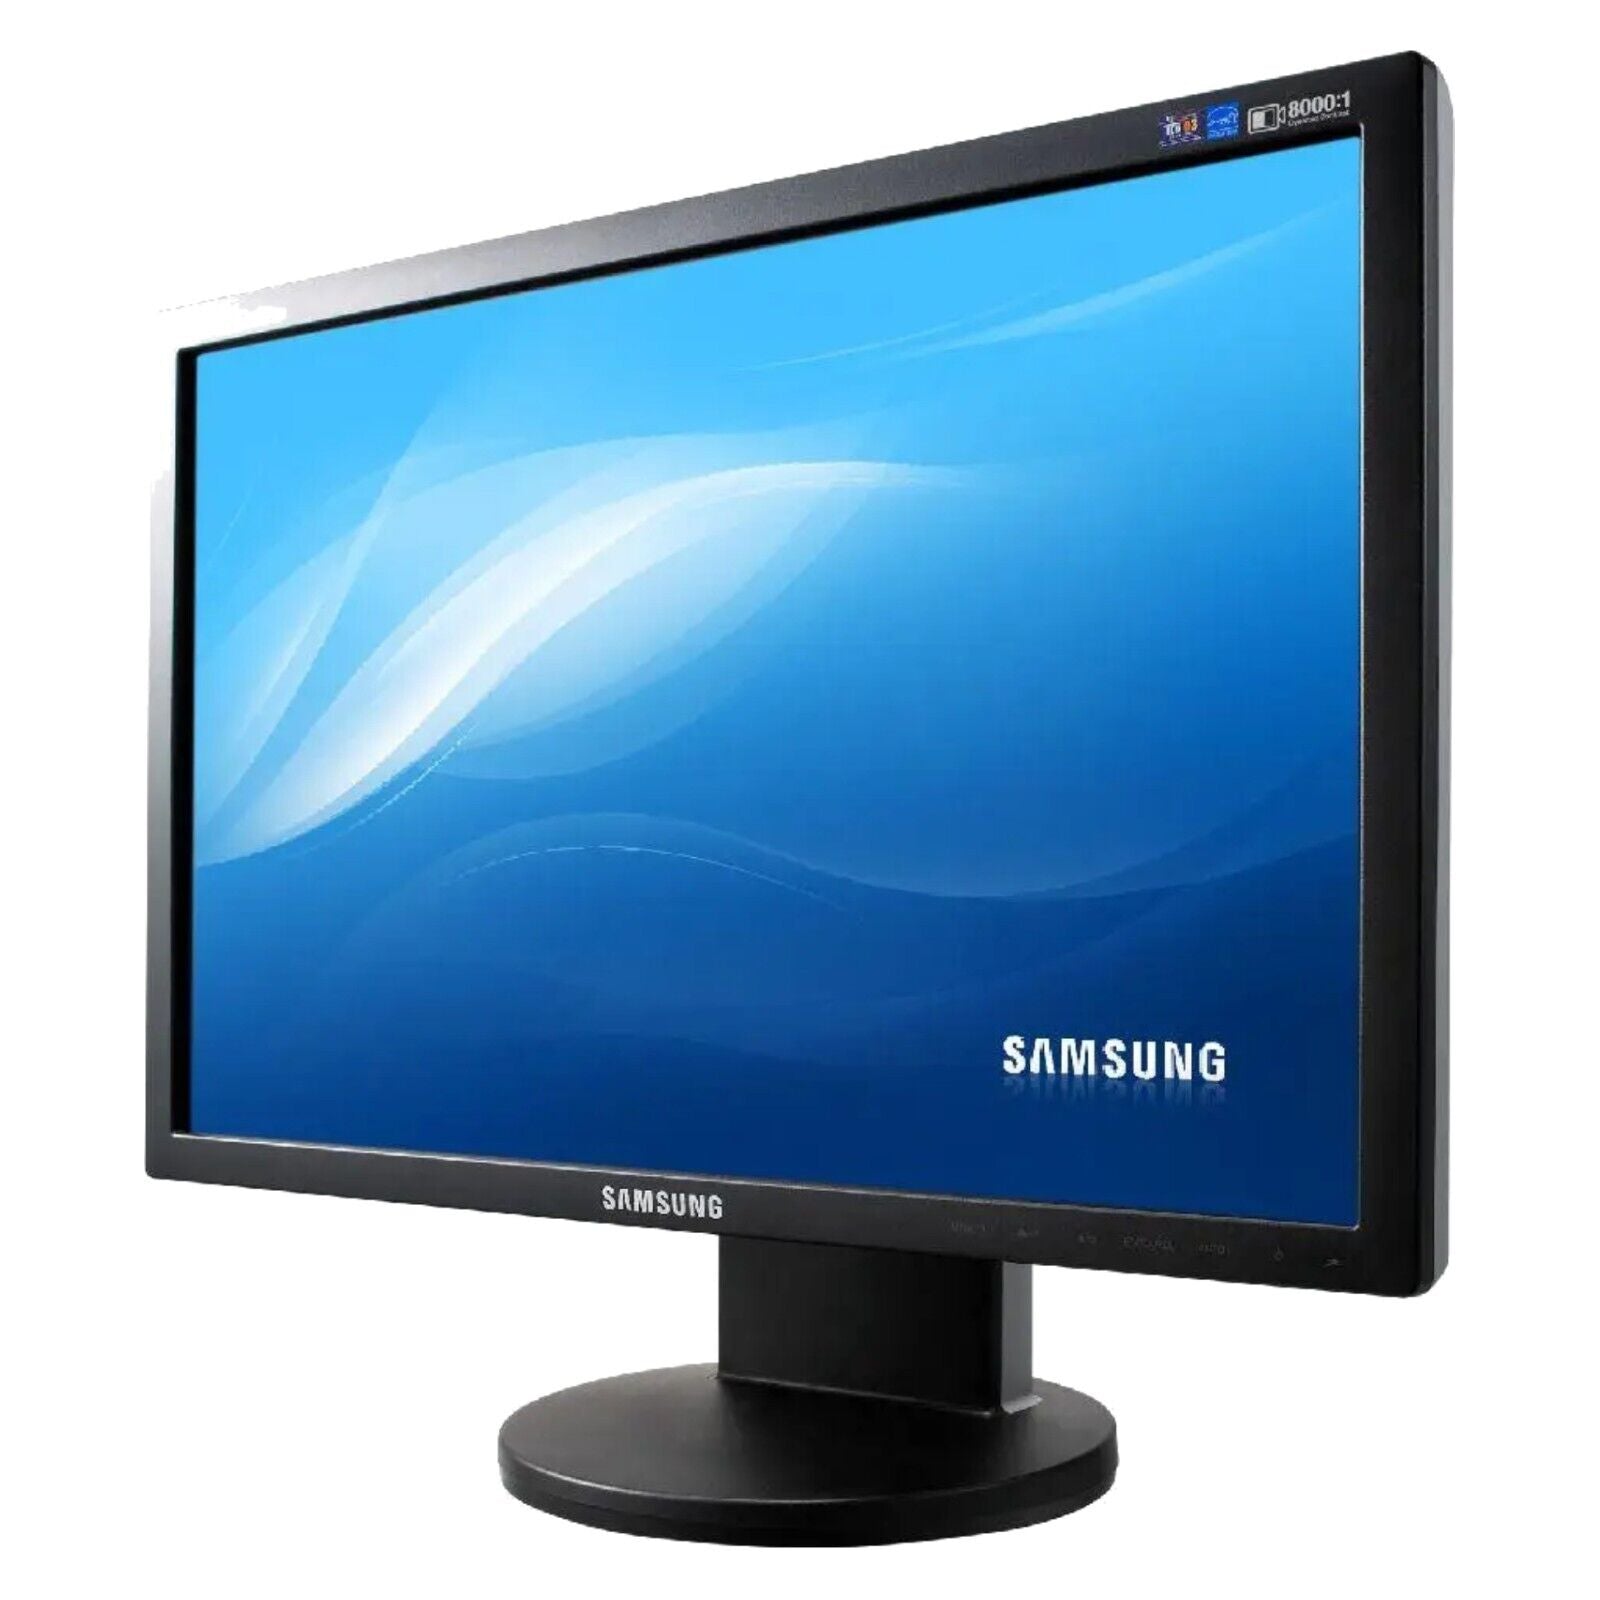 Samsung SyncMaster 2243BW 22" Widescreen LCD Monitor